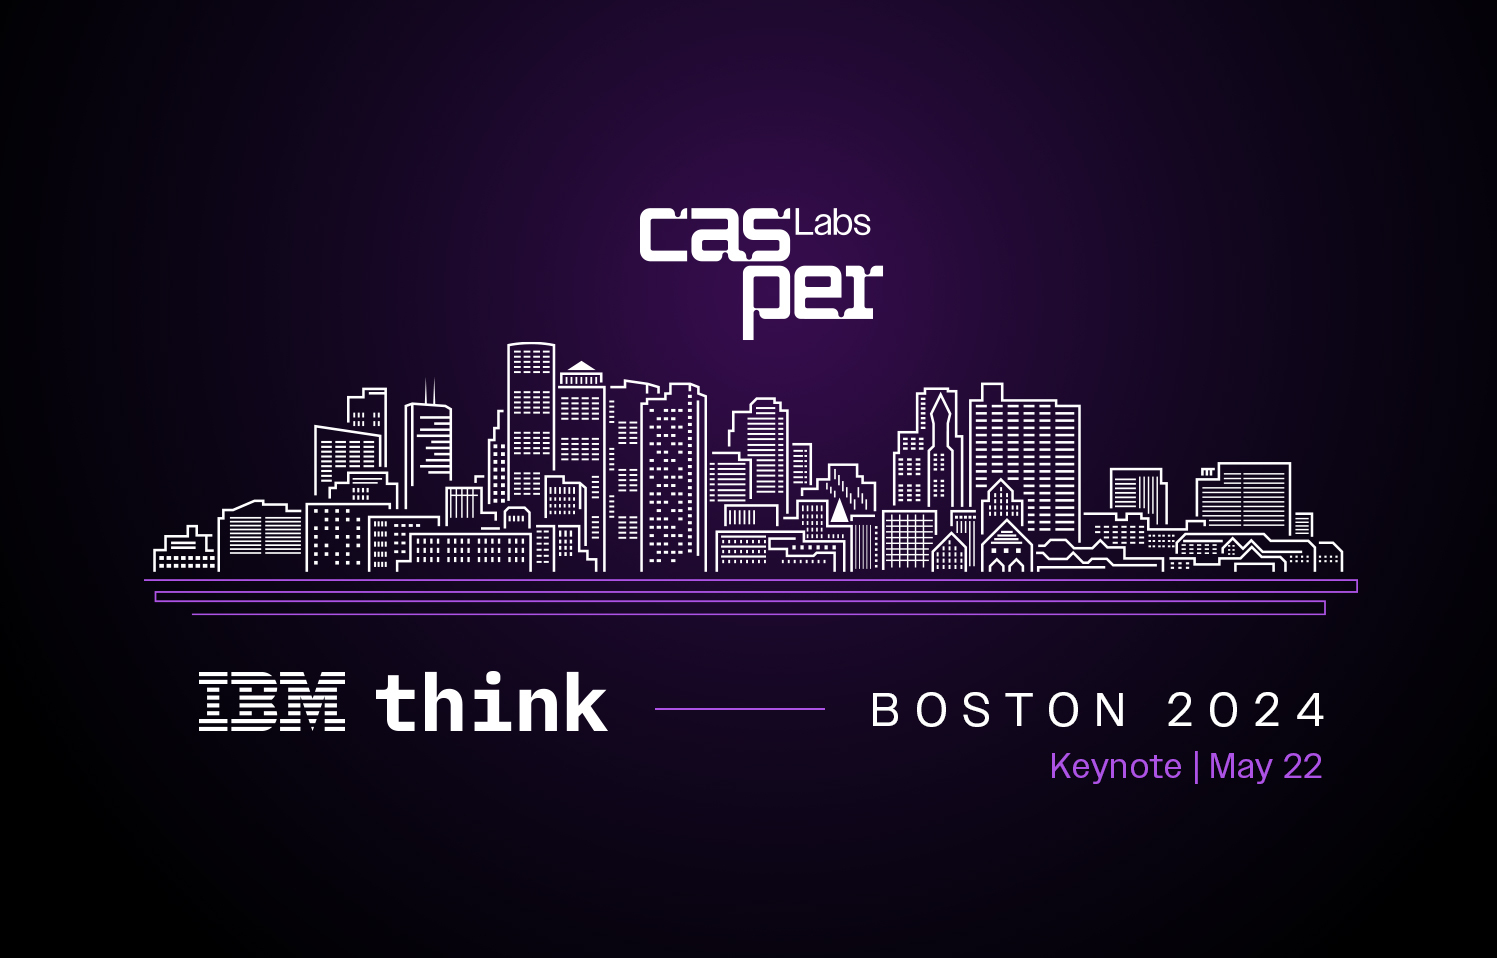 Casper Labs CEO to Join IBM Think Keynote on Scaling the Impact of AI | Casper Labs - In the News